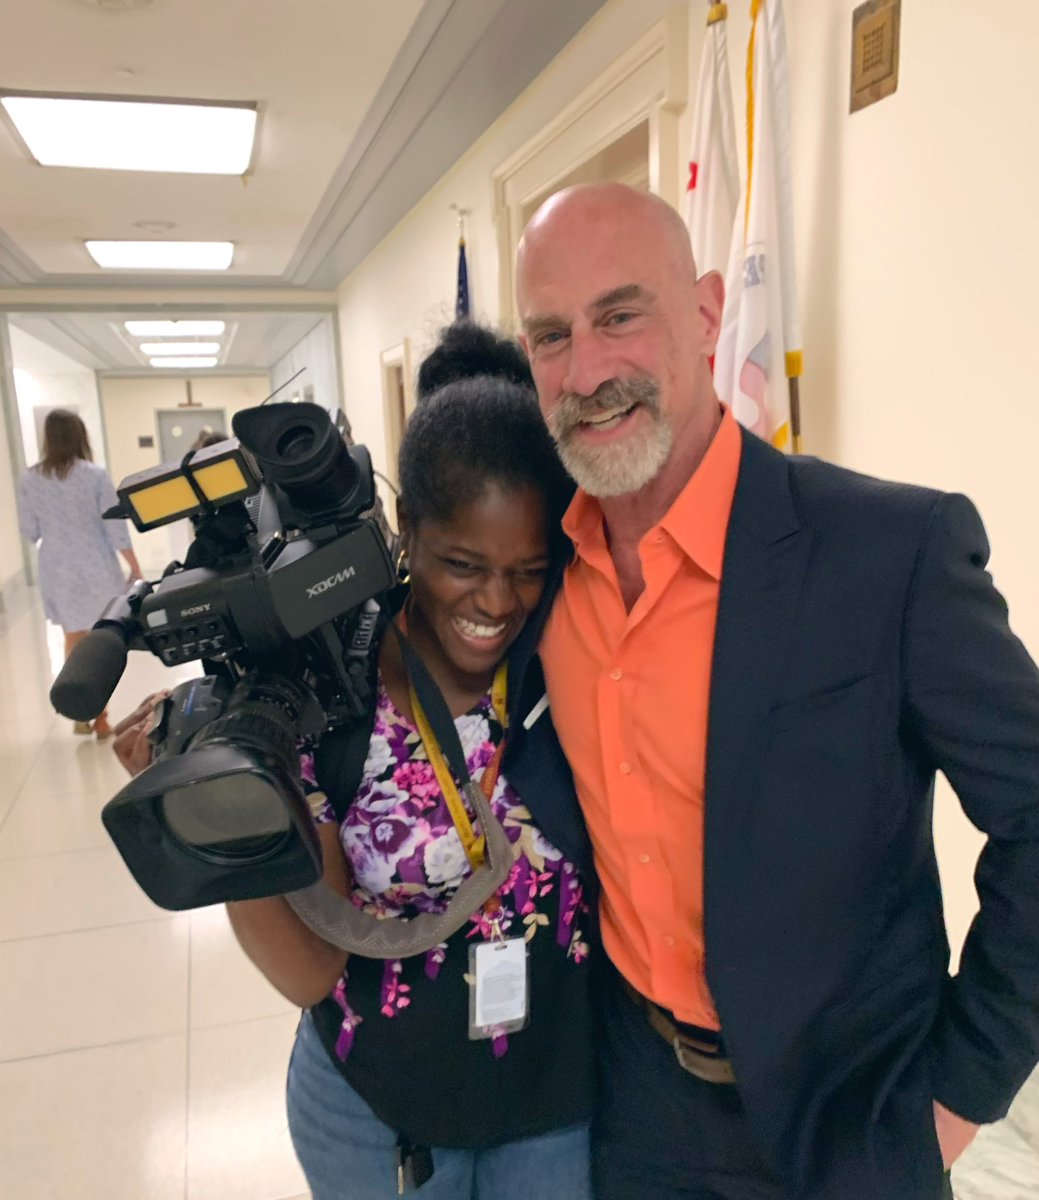 Today, I had the pleasure of meeting & 🎥 @Chris_Meloni on The Hill as he advocated for Lyme disease awareness & funding.  Still on cloud9 about this newsworthy assignment + meeting 1 of my FAVORITE actors.  To say all my dreams came true is an understatement! 
📸 @barnardfox5dc